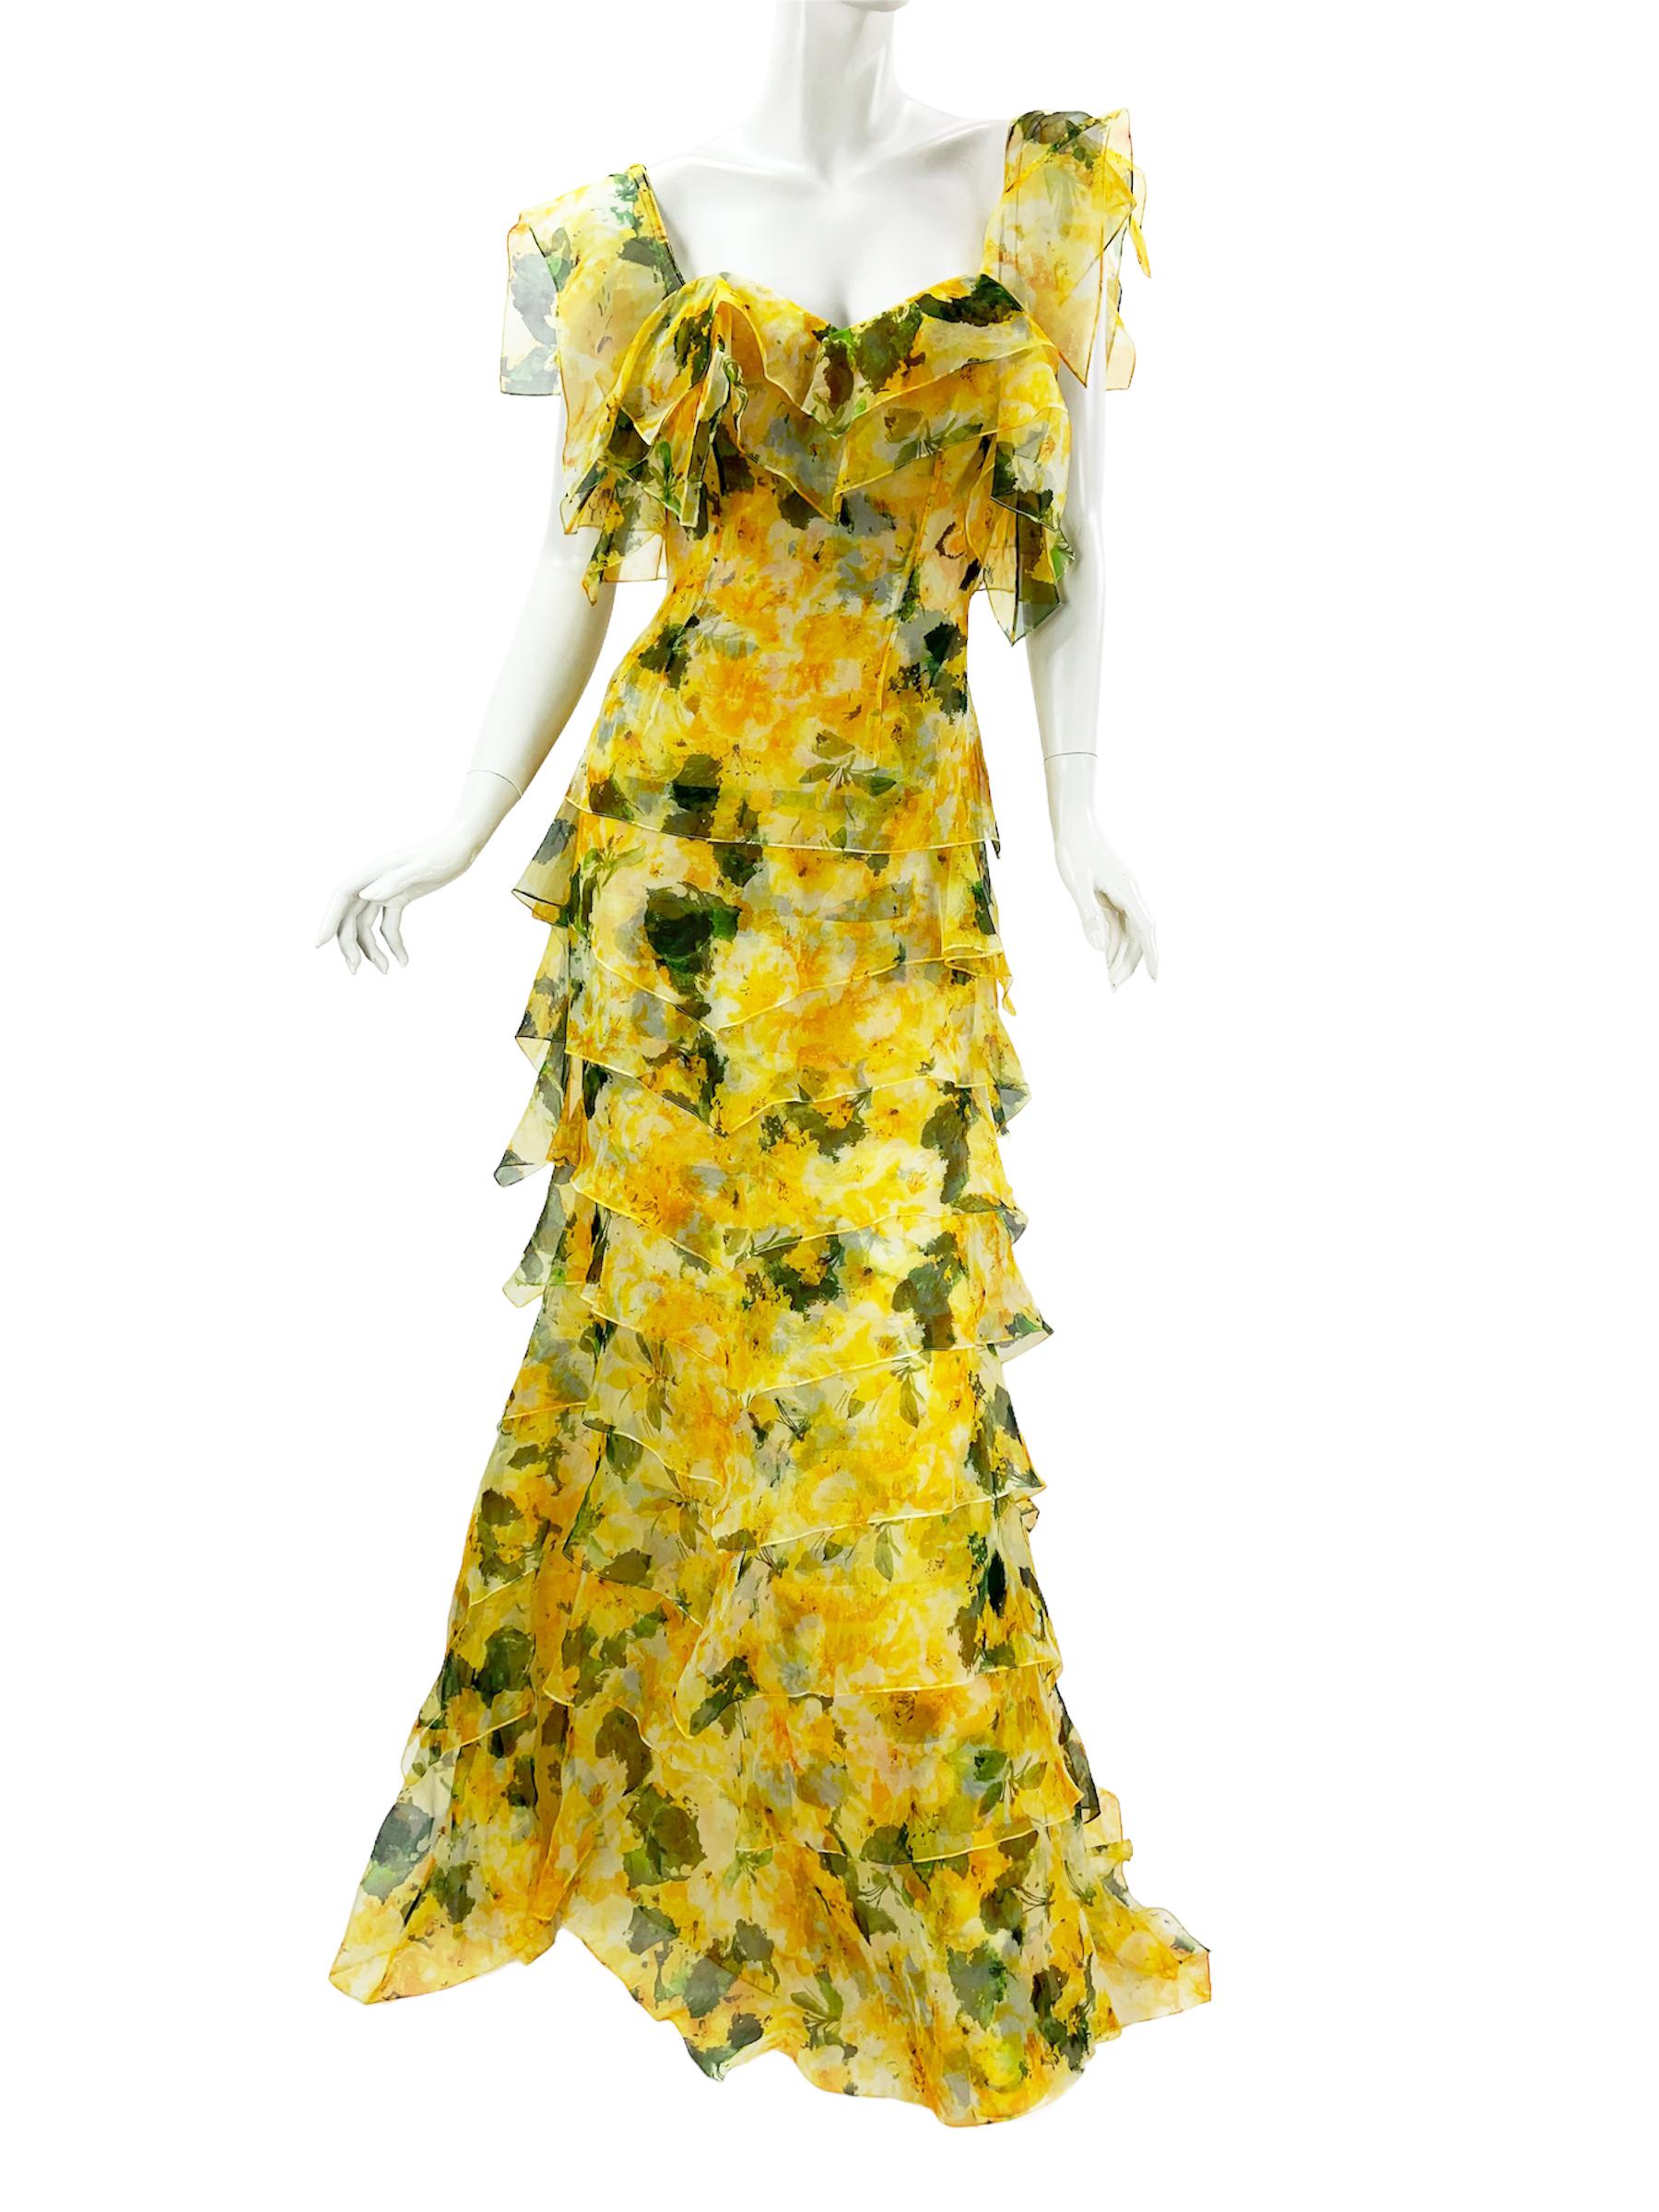 New Oscar de la Renta Silk Yellow Tiered Maxi Corset Dress
S/S 2014 Collection
US size - 10
100% Silk Chiffon, Yellow Flowers with Green Leaves Print, Fully Tiered, 
Finished with Corset, Fully Lined, Back Zip Closure. Fabric not